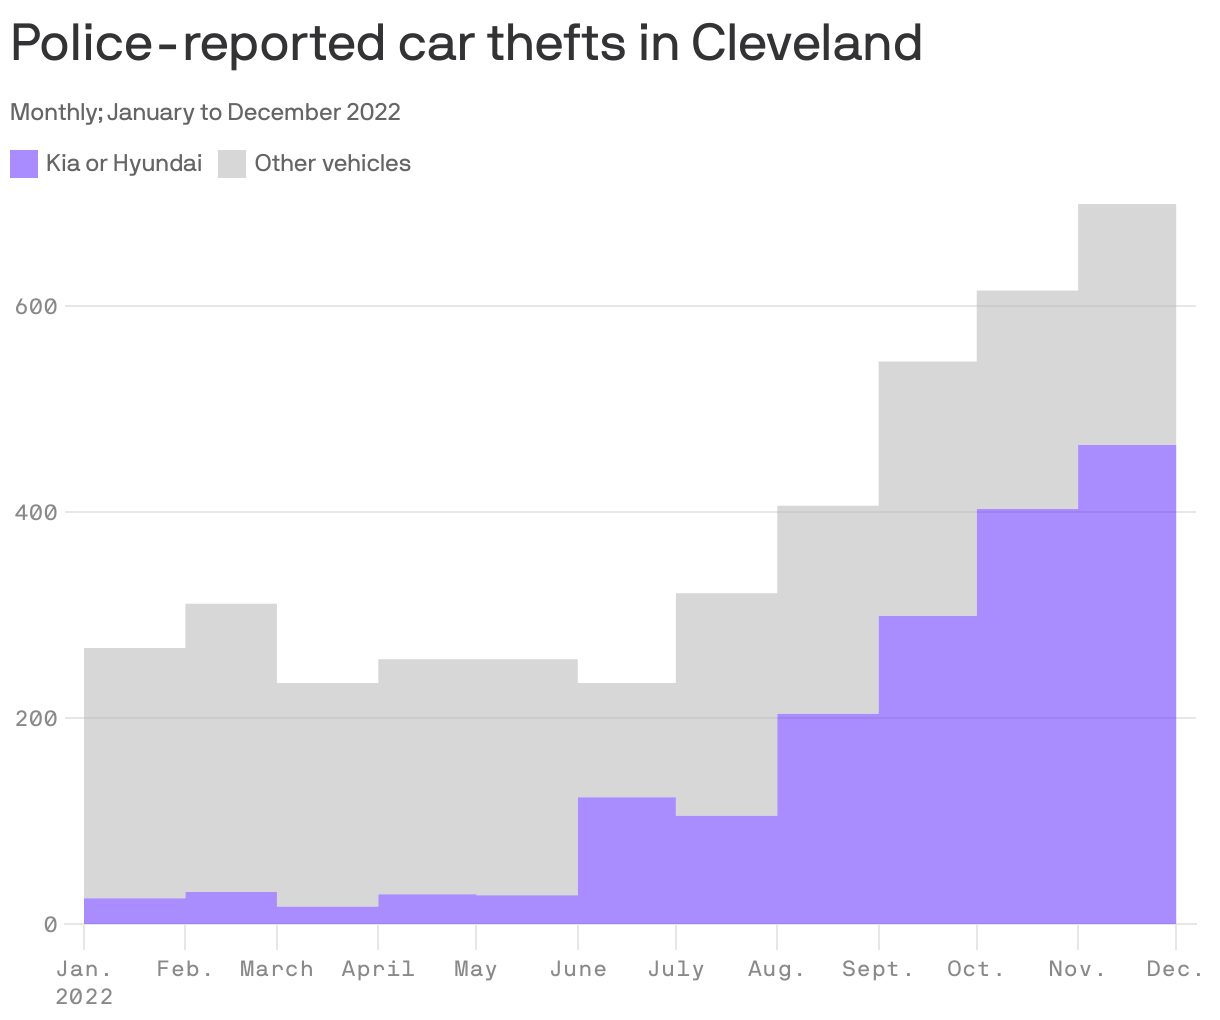 Police-reported car thefts in Cleveland